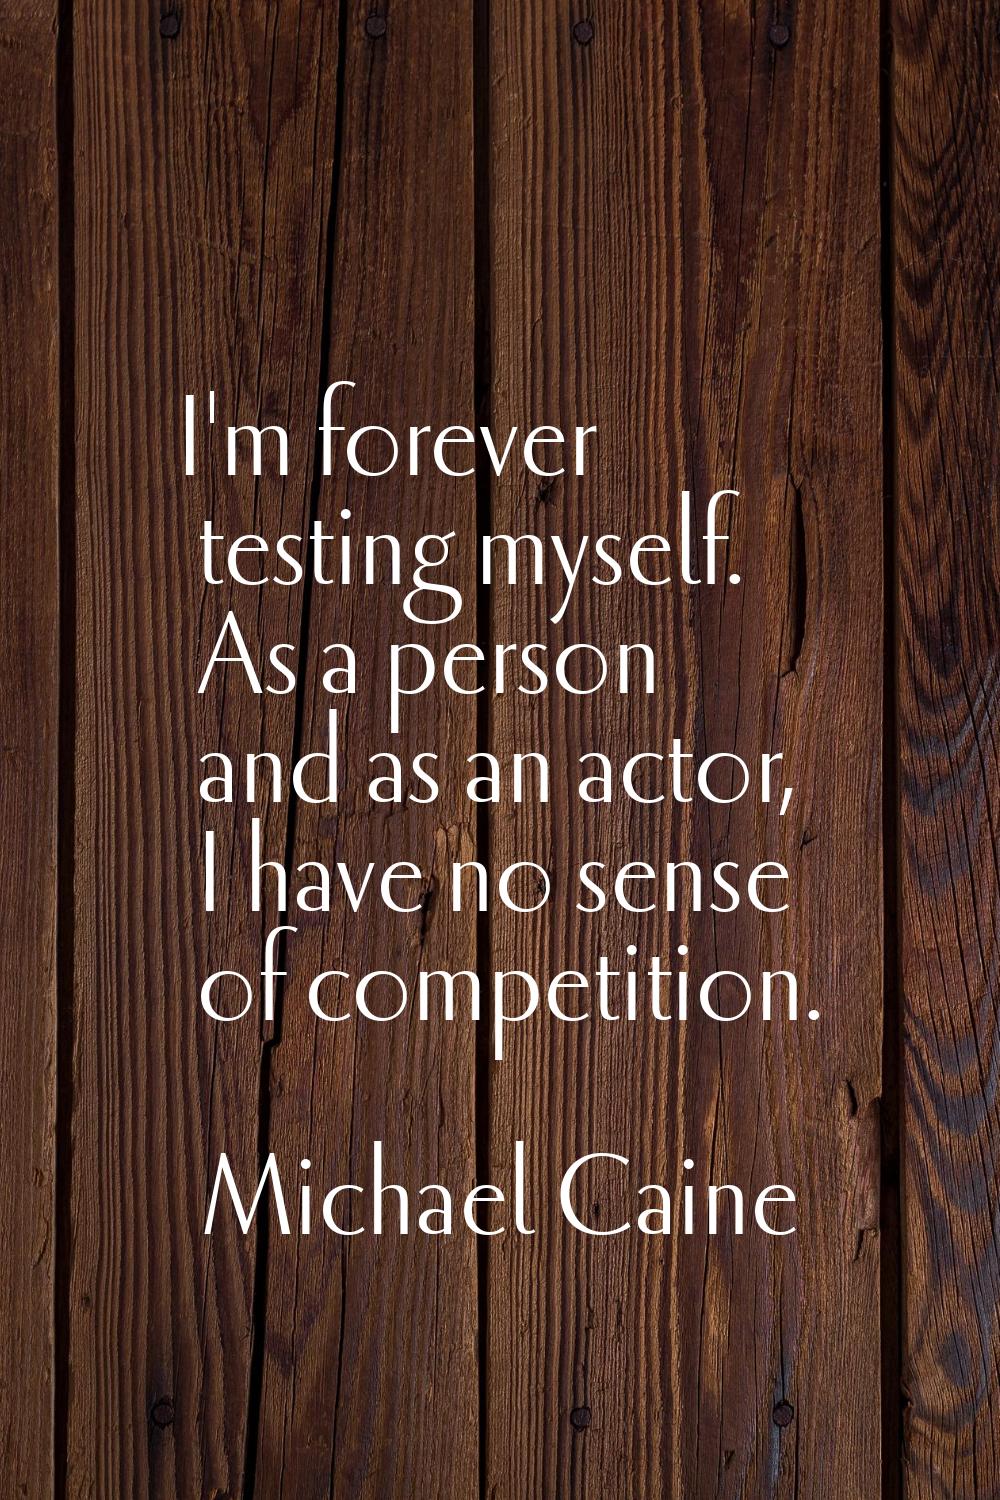 I'm forever testing myself. As a person and as an actor, I have no sense of competition.